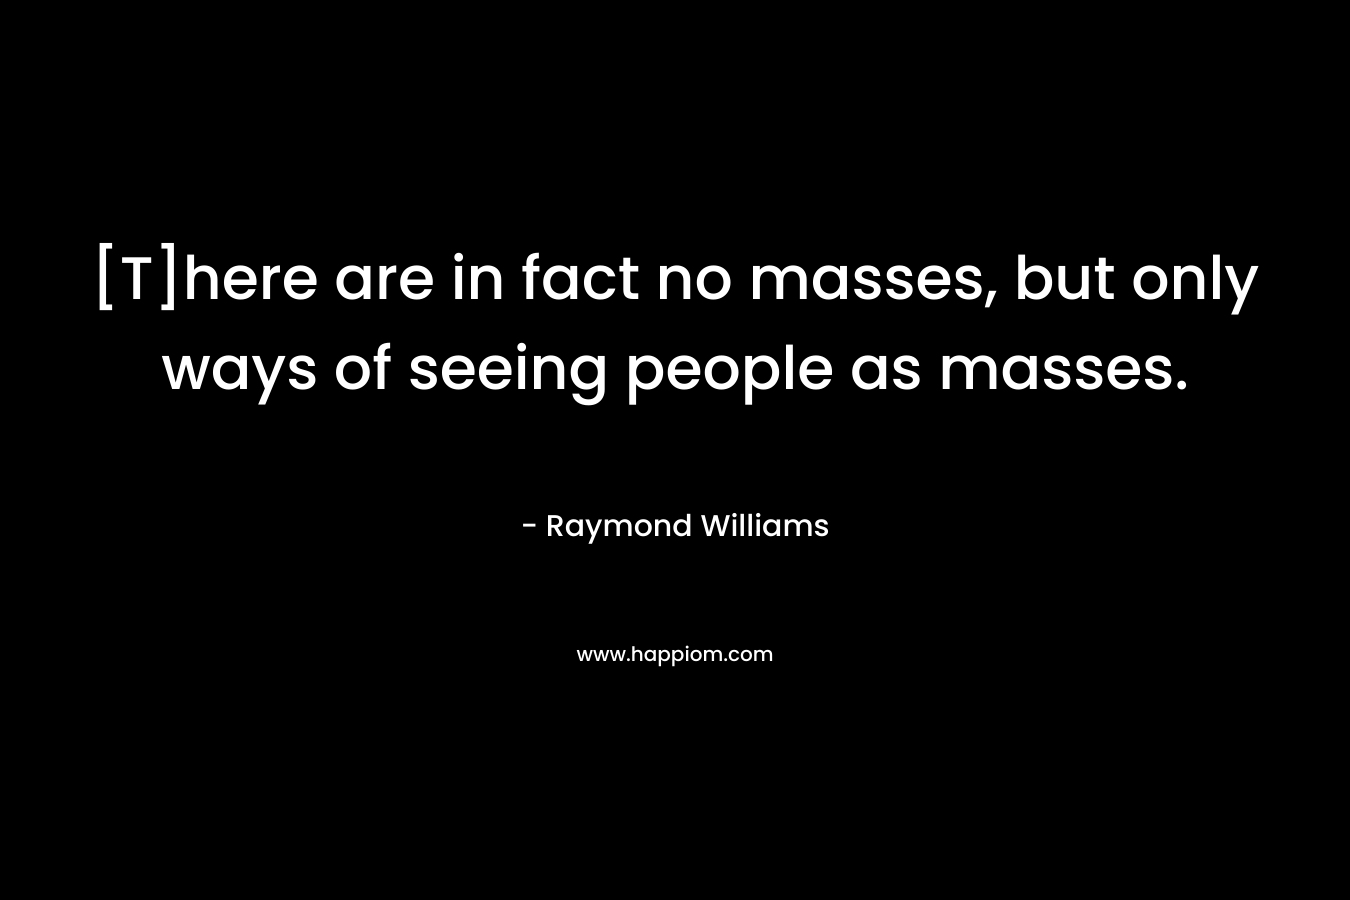 [T]here are in fact no masses, but only ways of seeing people as masses. – Raymond Williams